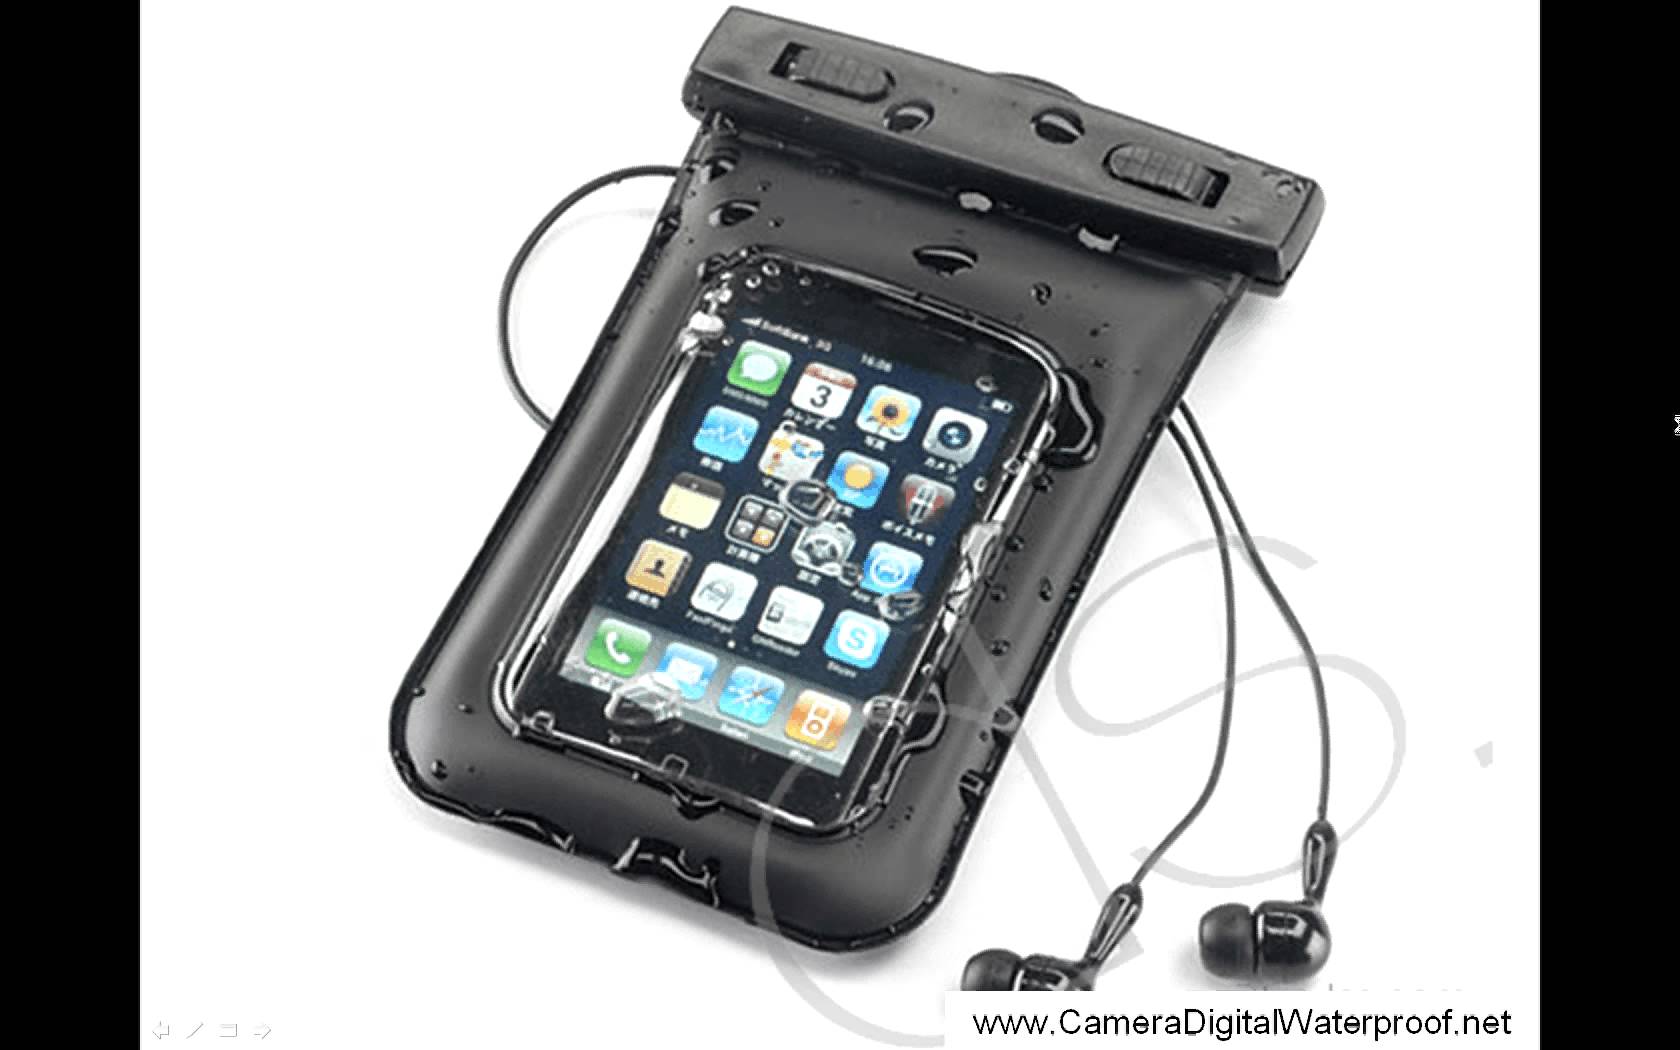 Waterproof Cases for iPhones, iPads, Digital Cameras and other Gadgets HD